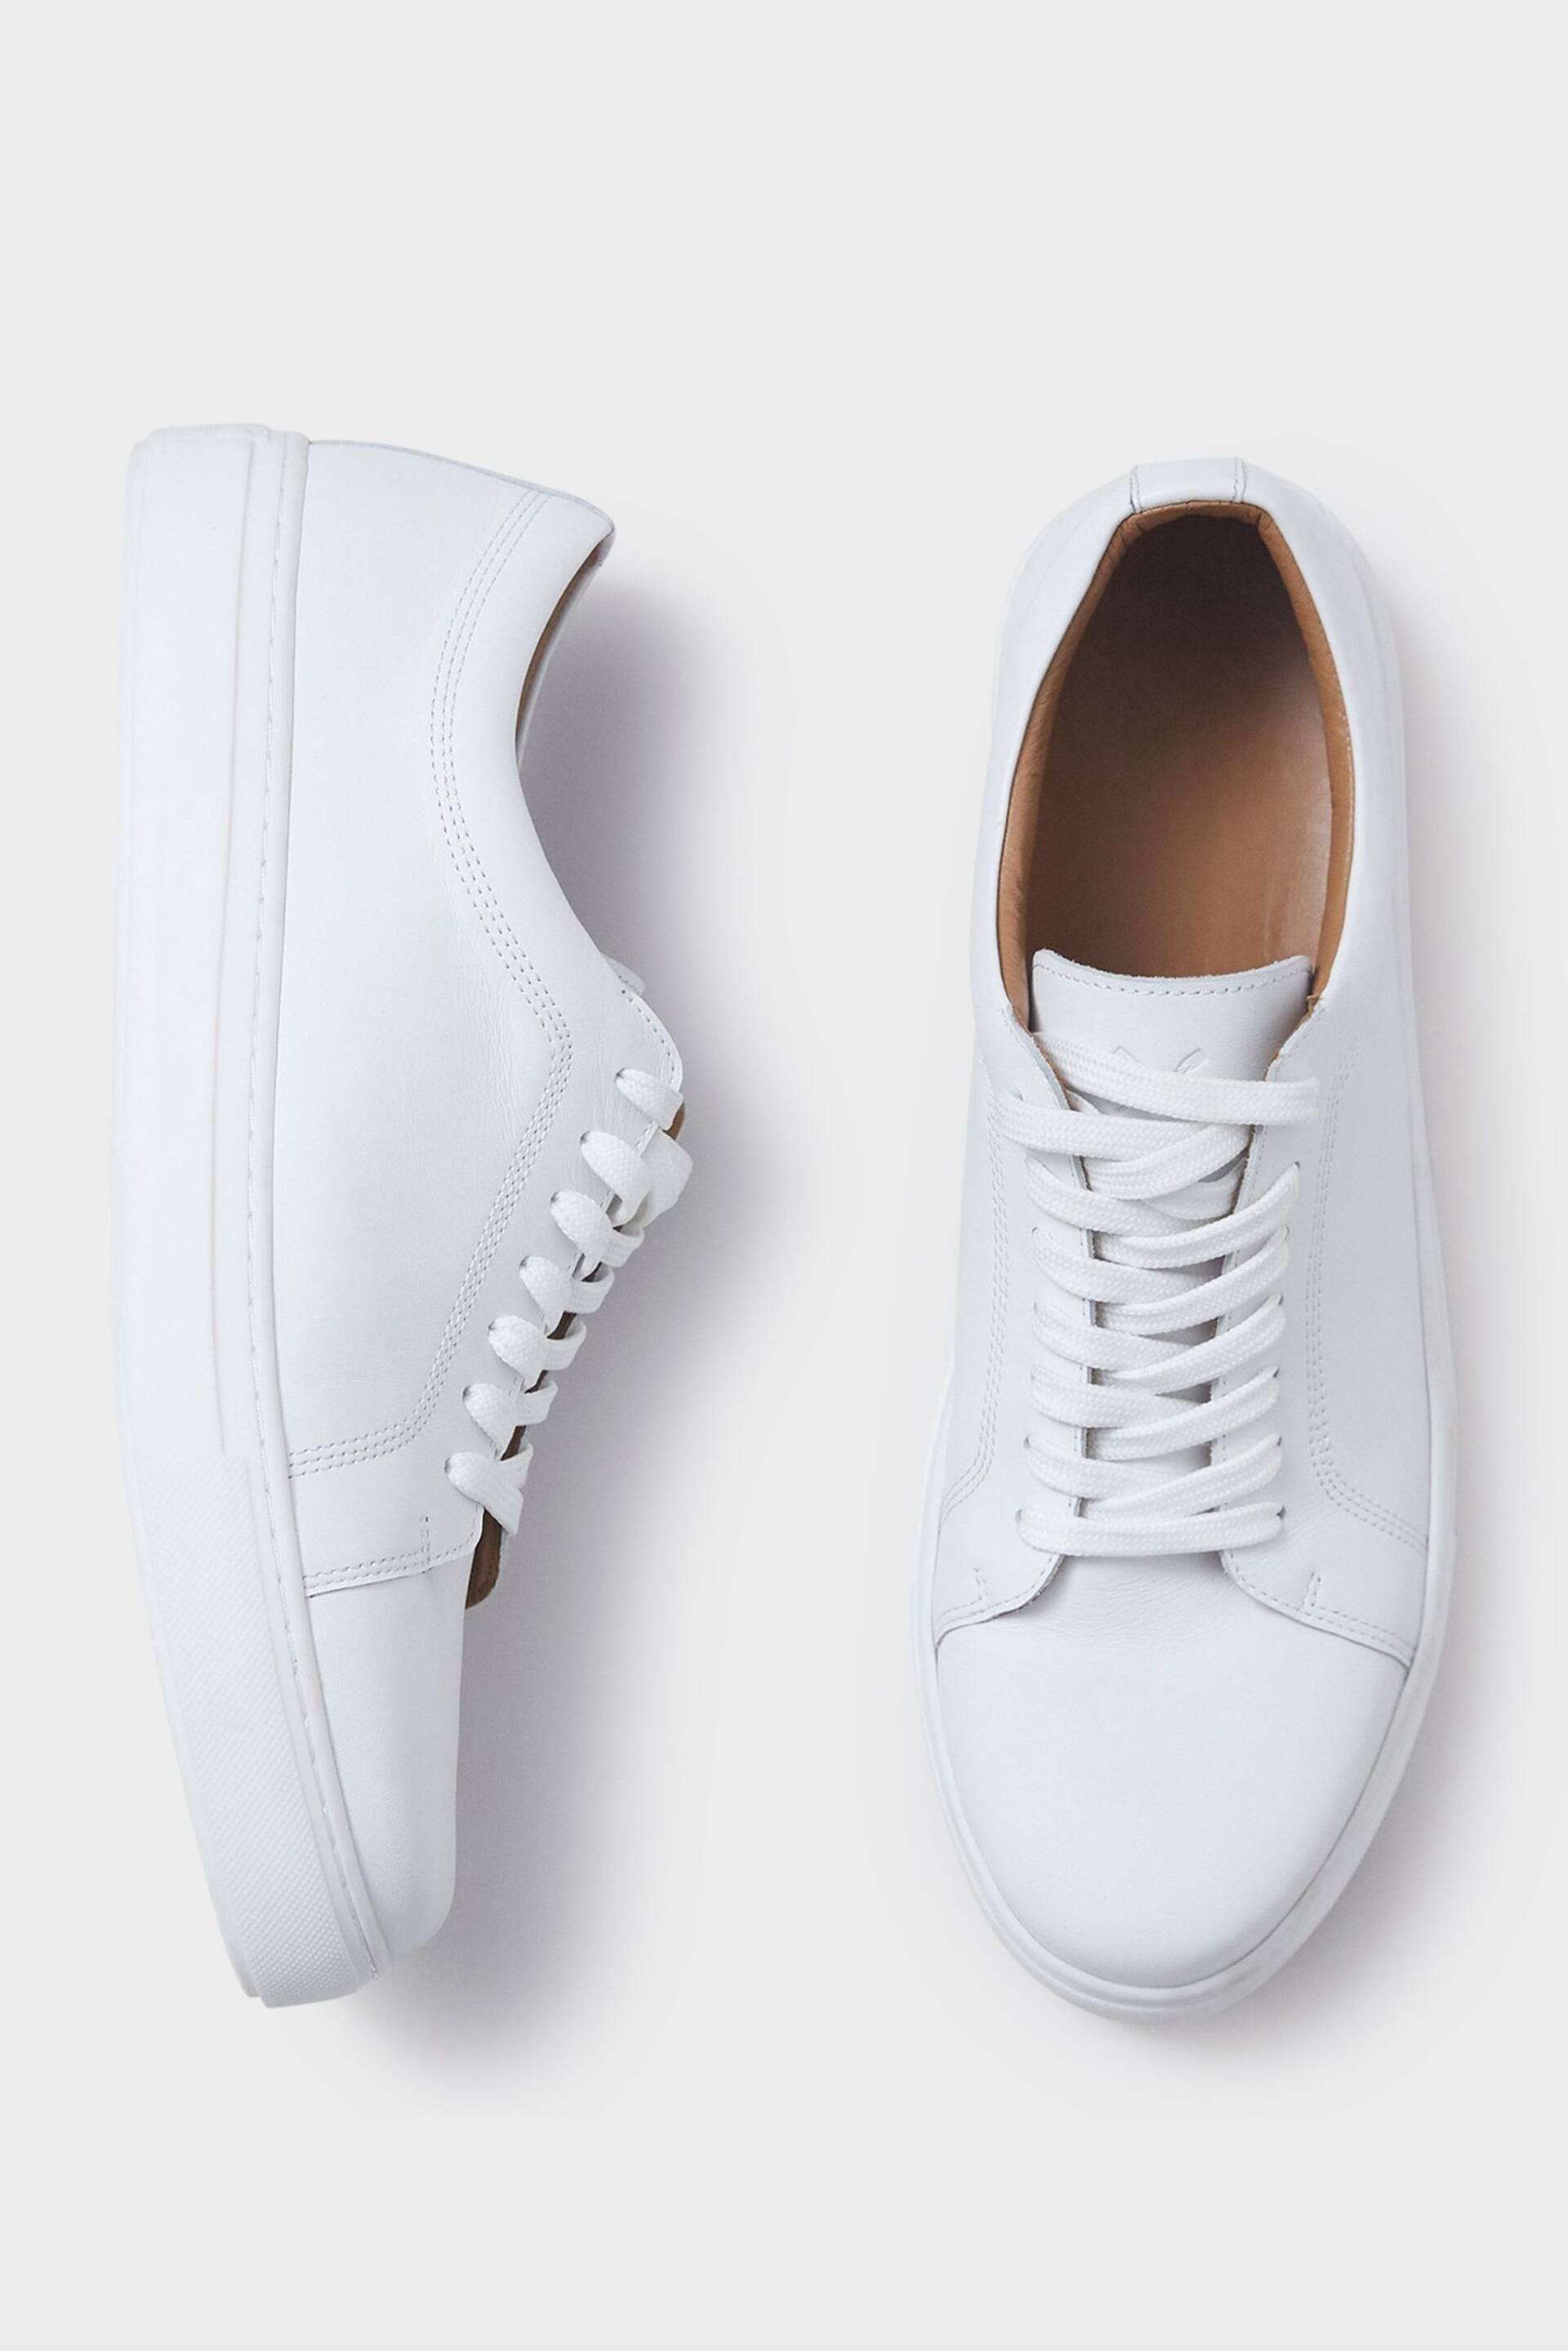 Crew Clothing White  Leather  Trainer - Image 2 of 2